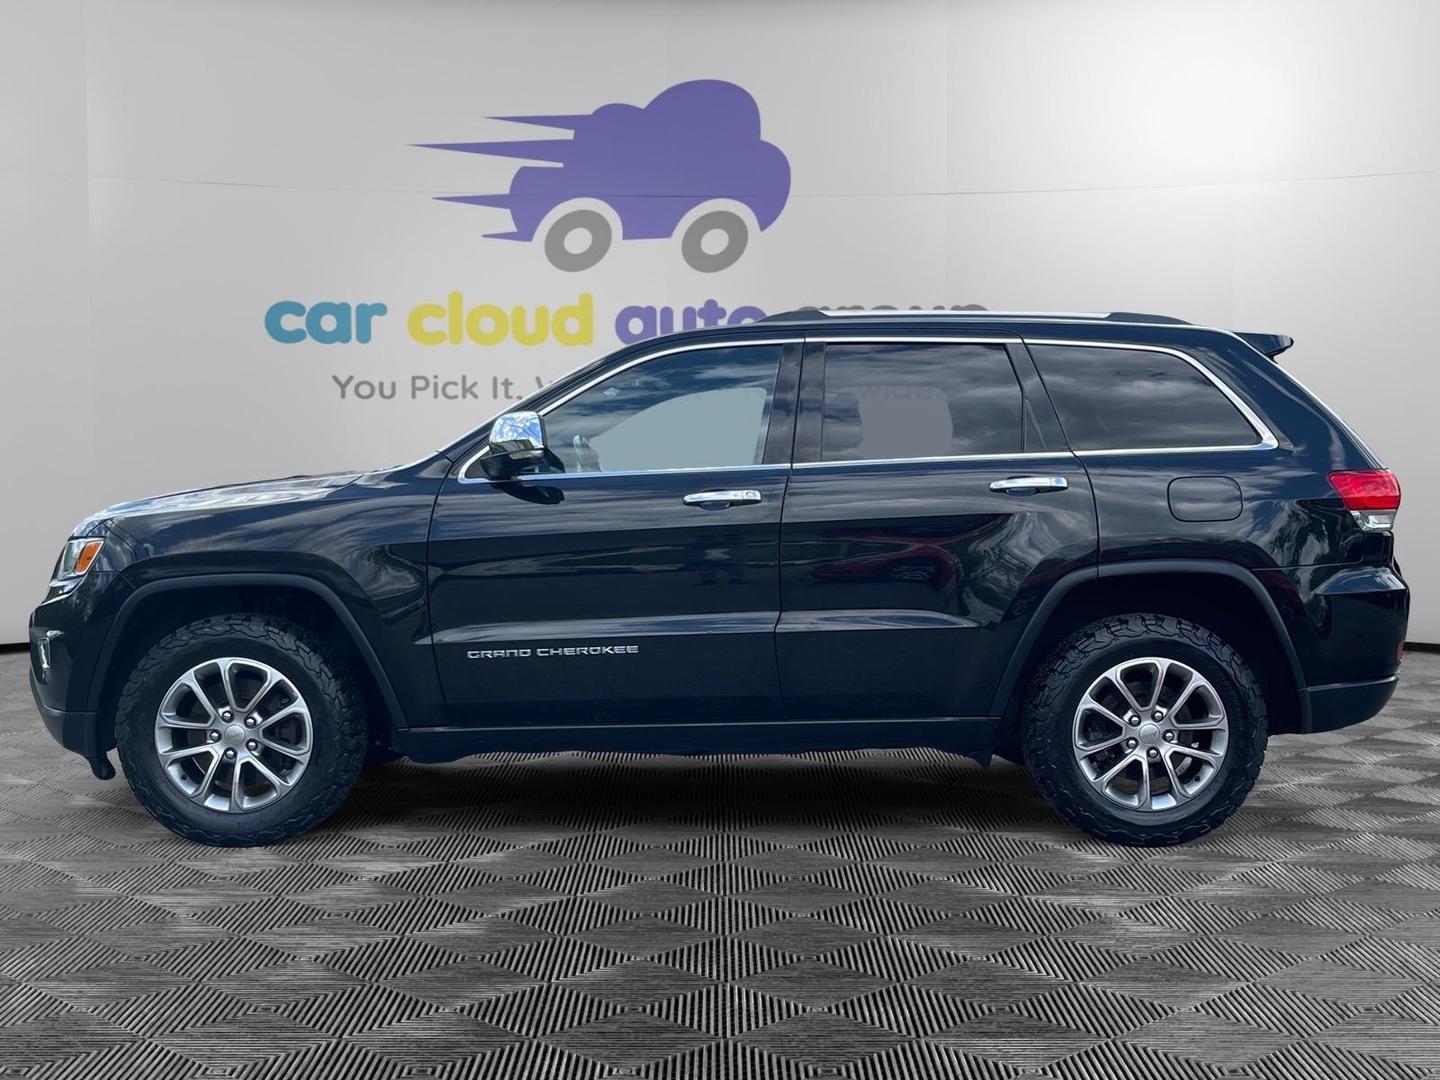 2015 Jeep Grand Cherokee Utility 4d Limited 4wd 3.0l V6 T-diesel - Image 2